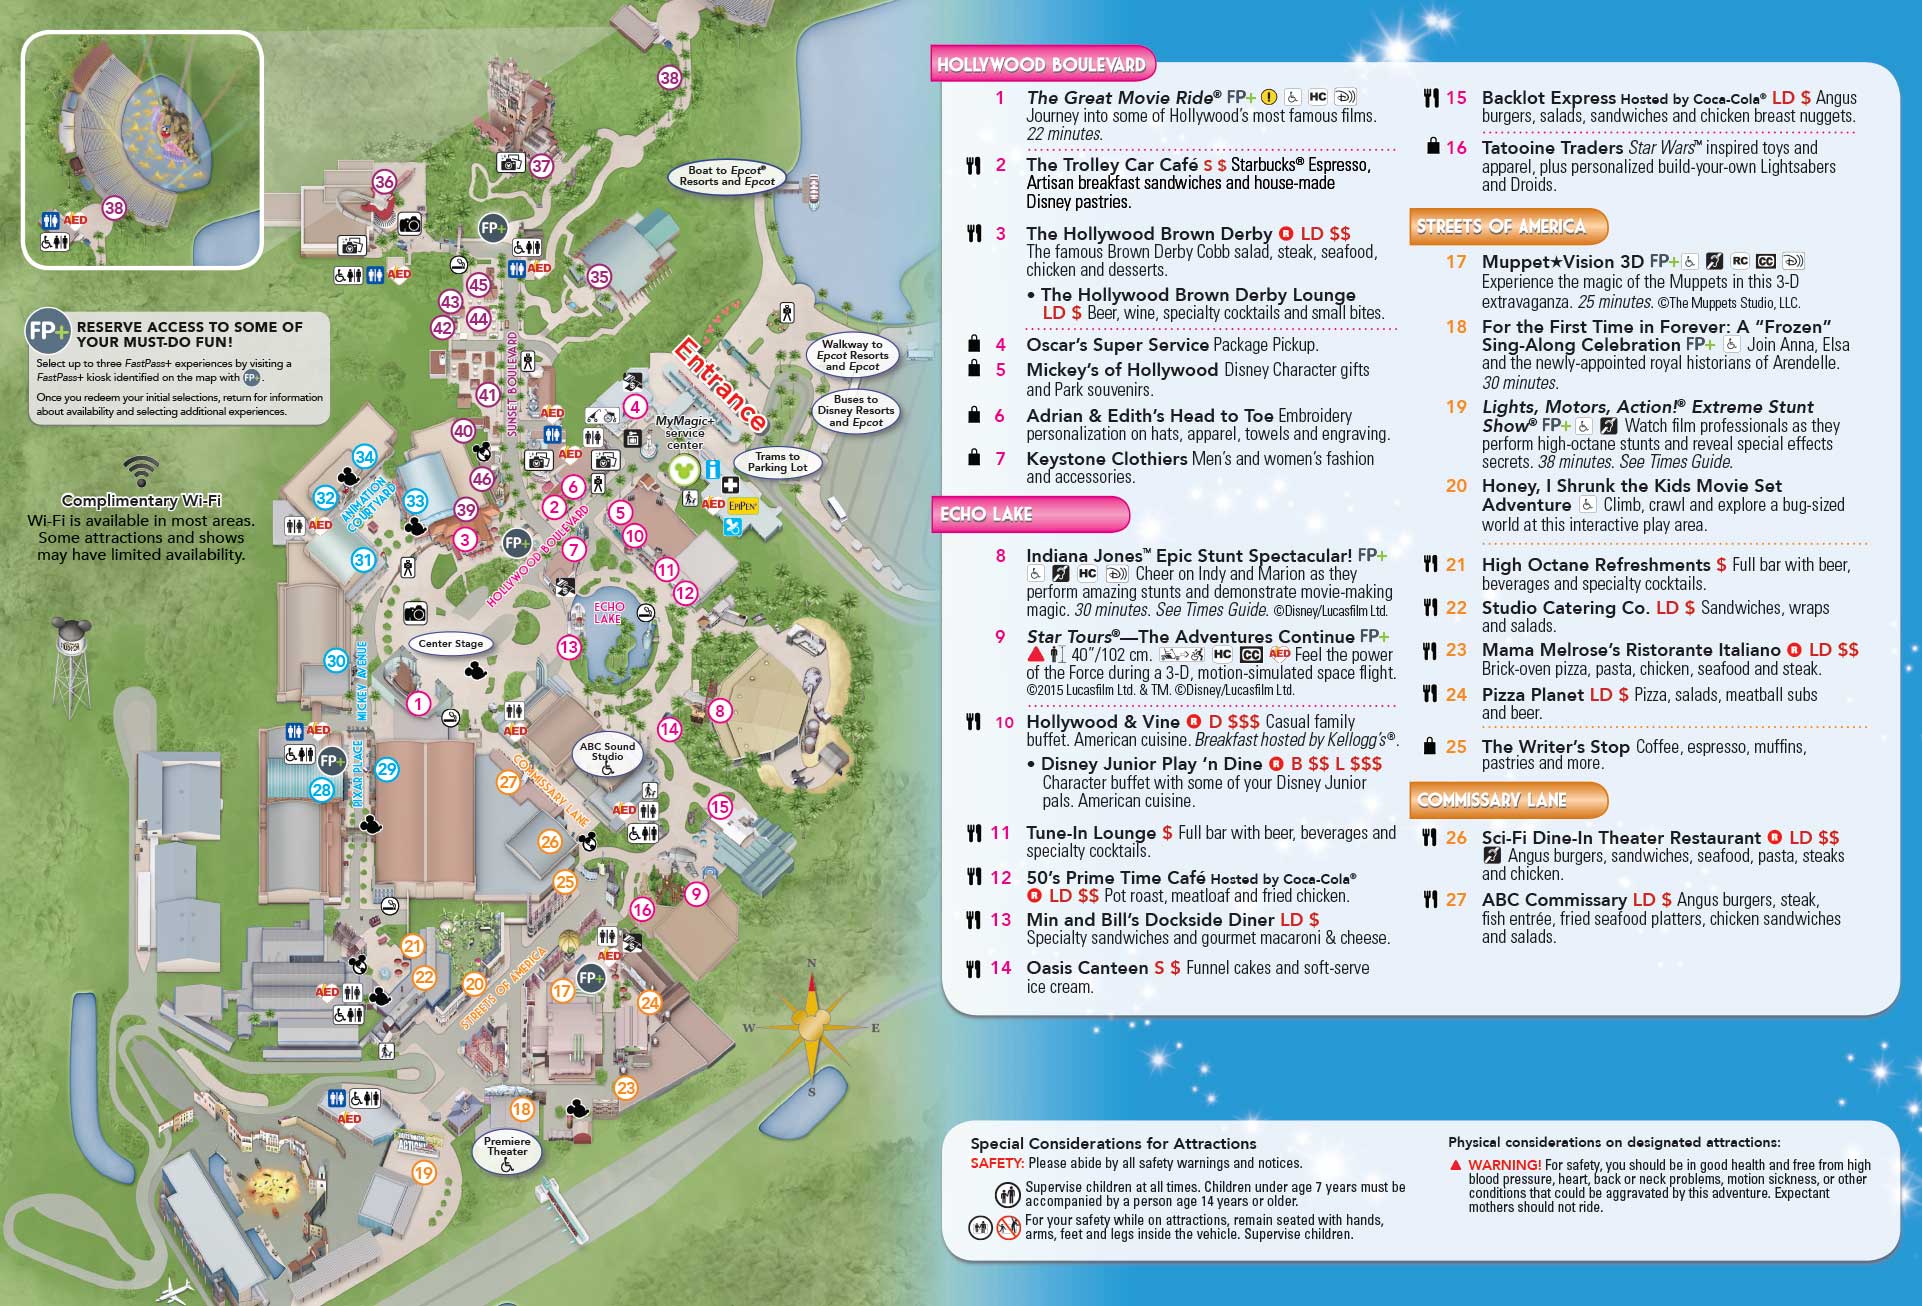 PHOTO New Disney S Hollywood Studios Guide Map Updated With Center Stage Addition